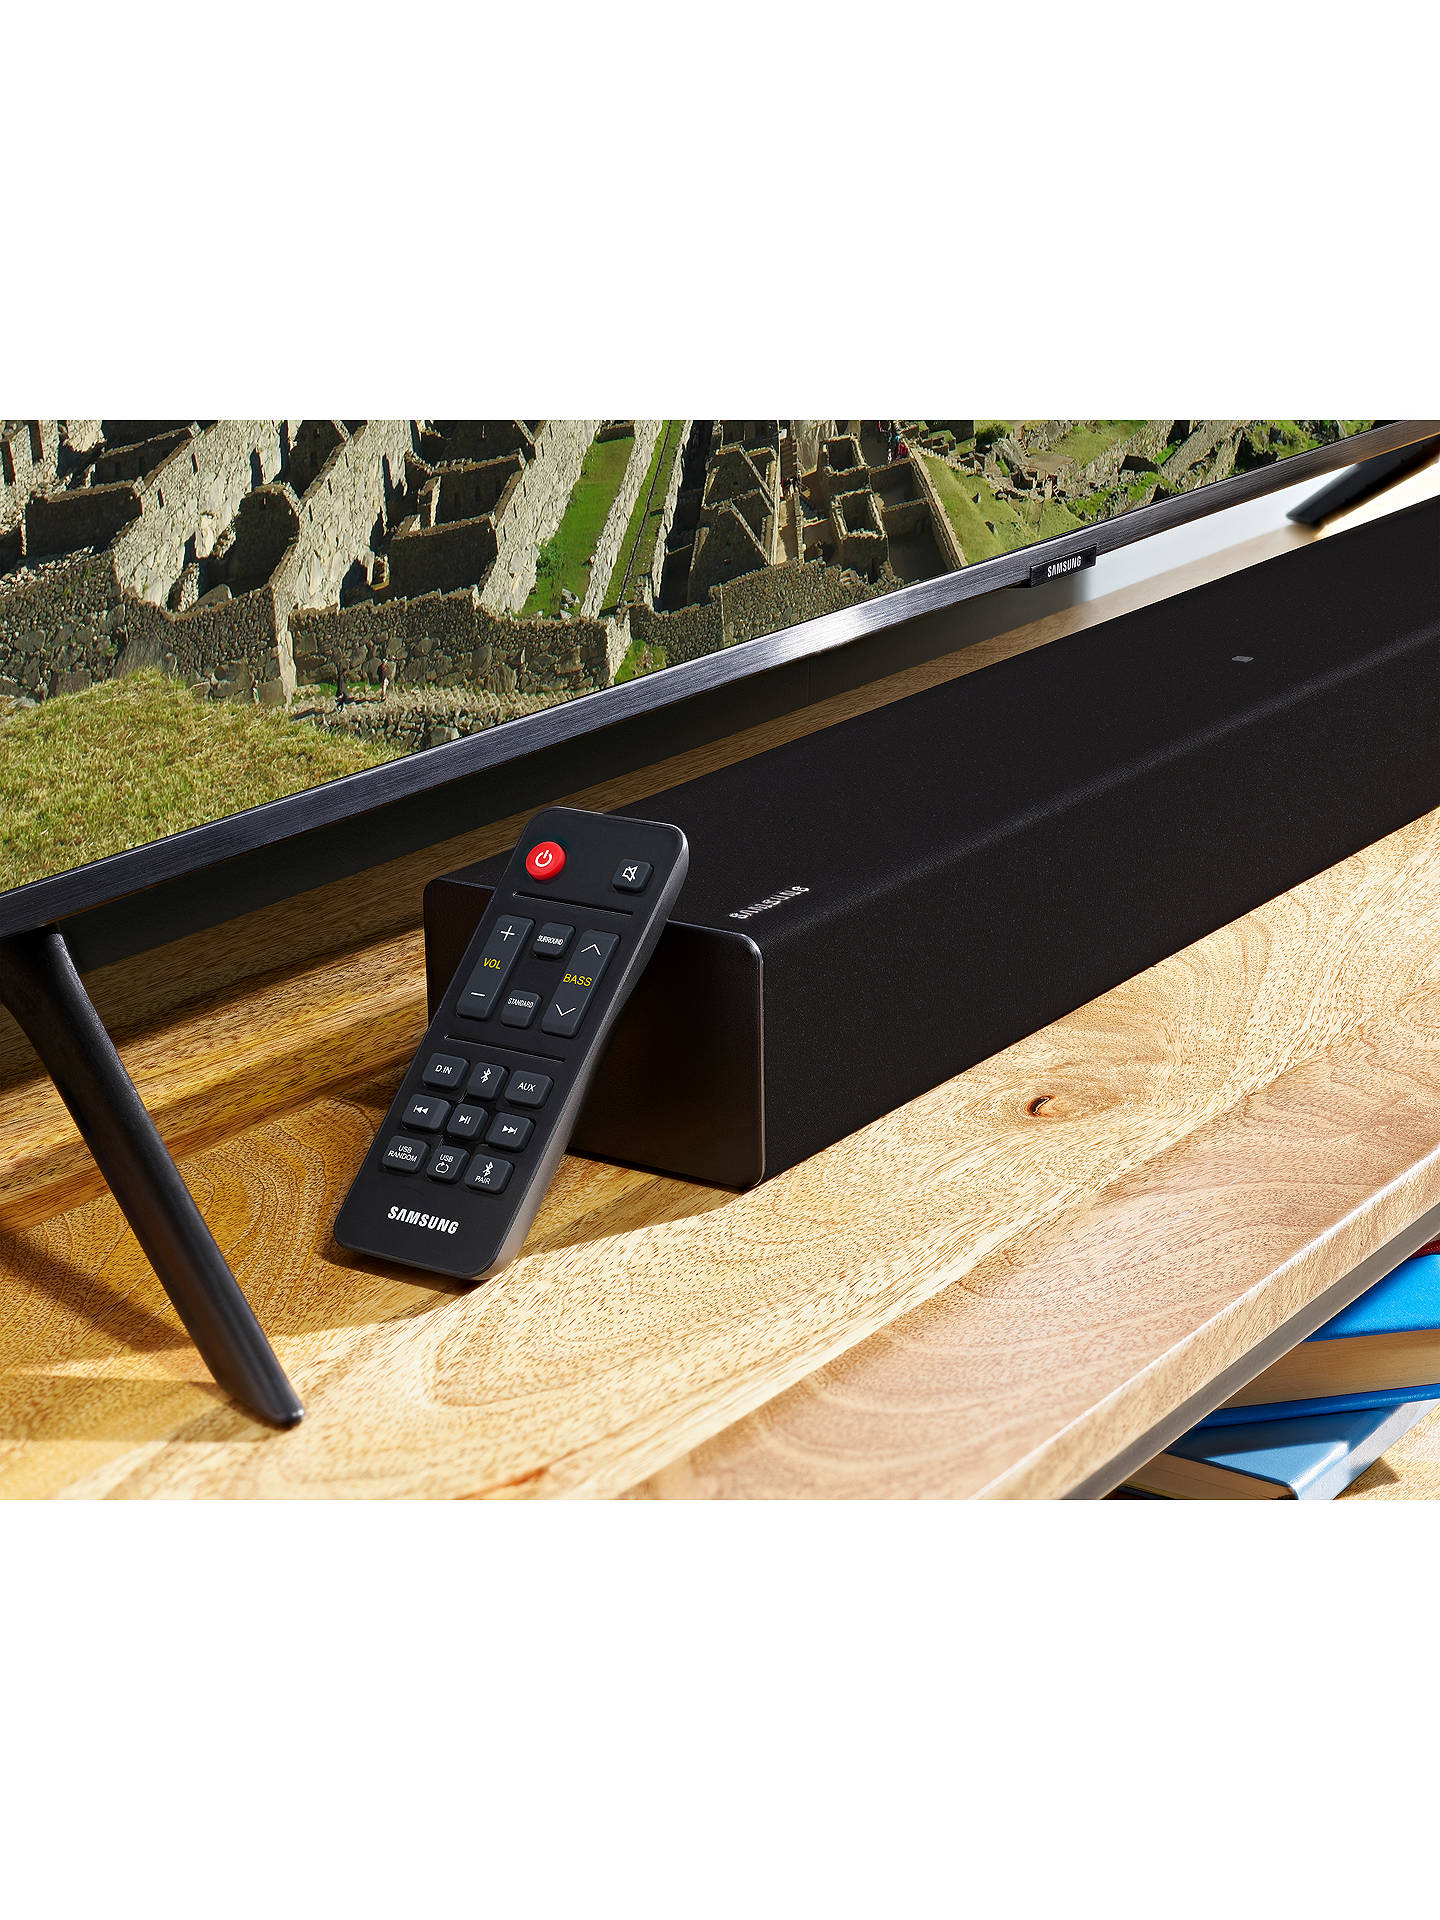 Samsung Hw T400 Bluetooth Nfc All In One Compact Sound Bar At John Lewis Partners